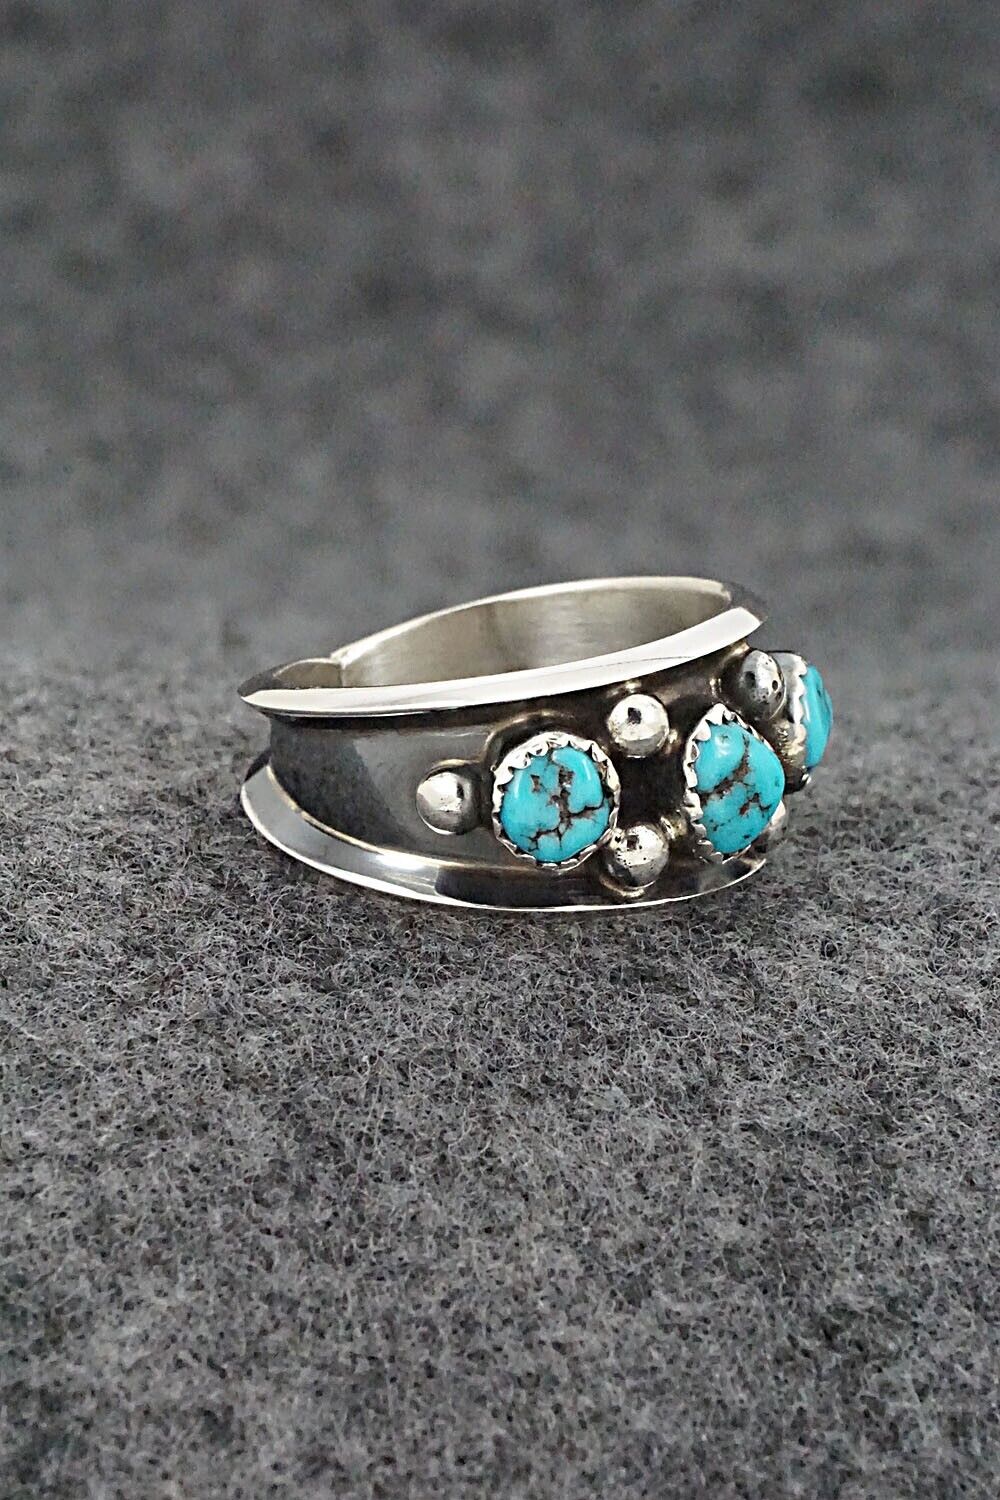 Turquoise & Sterling Silver Ring - Paul Largo - Size 8.5